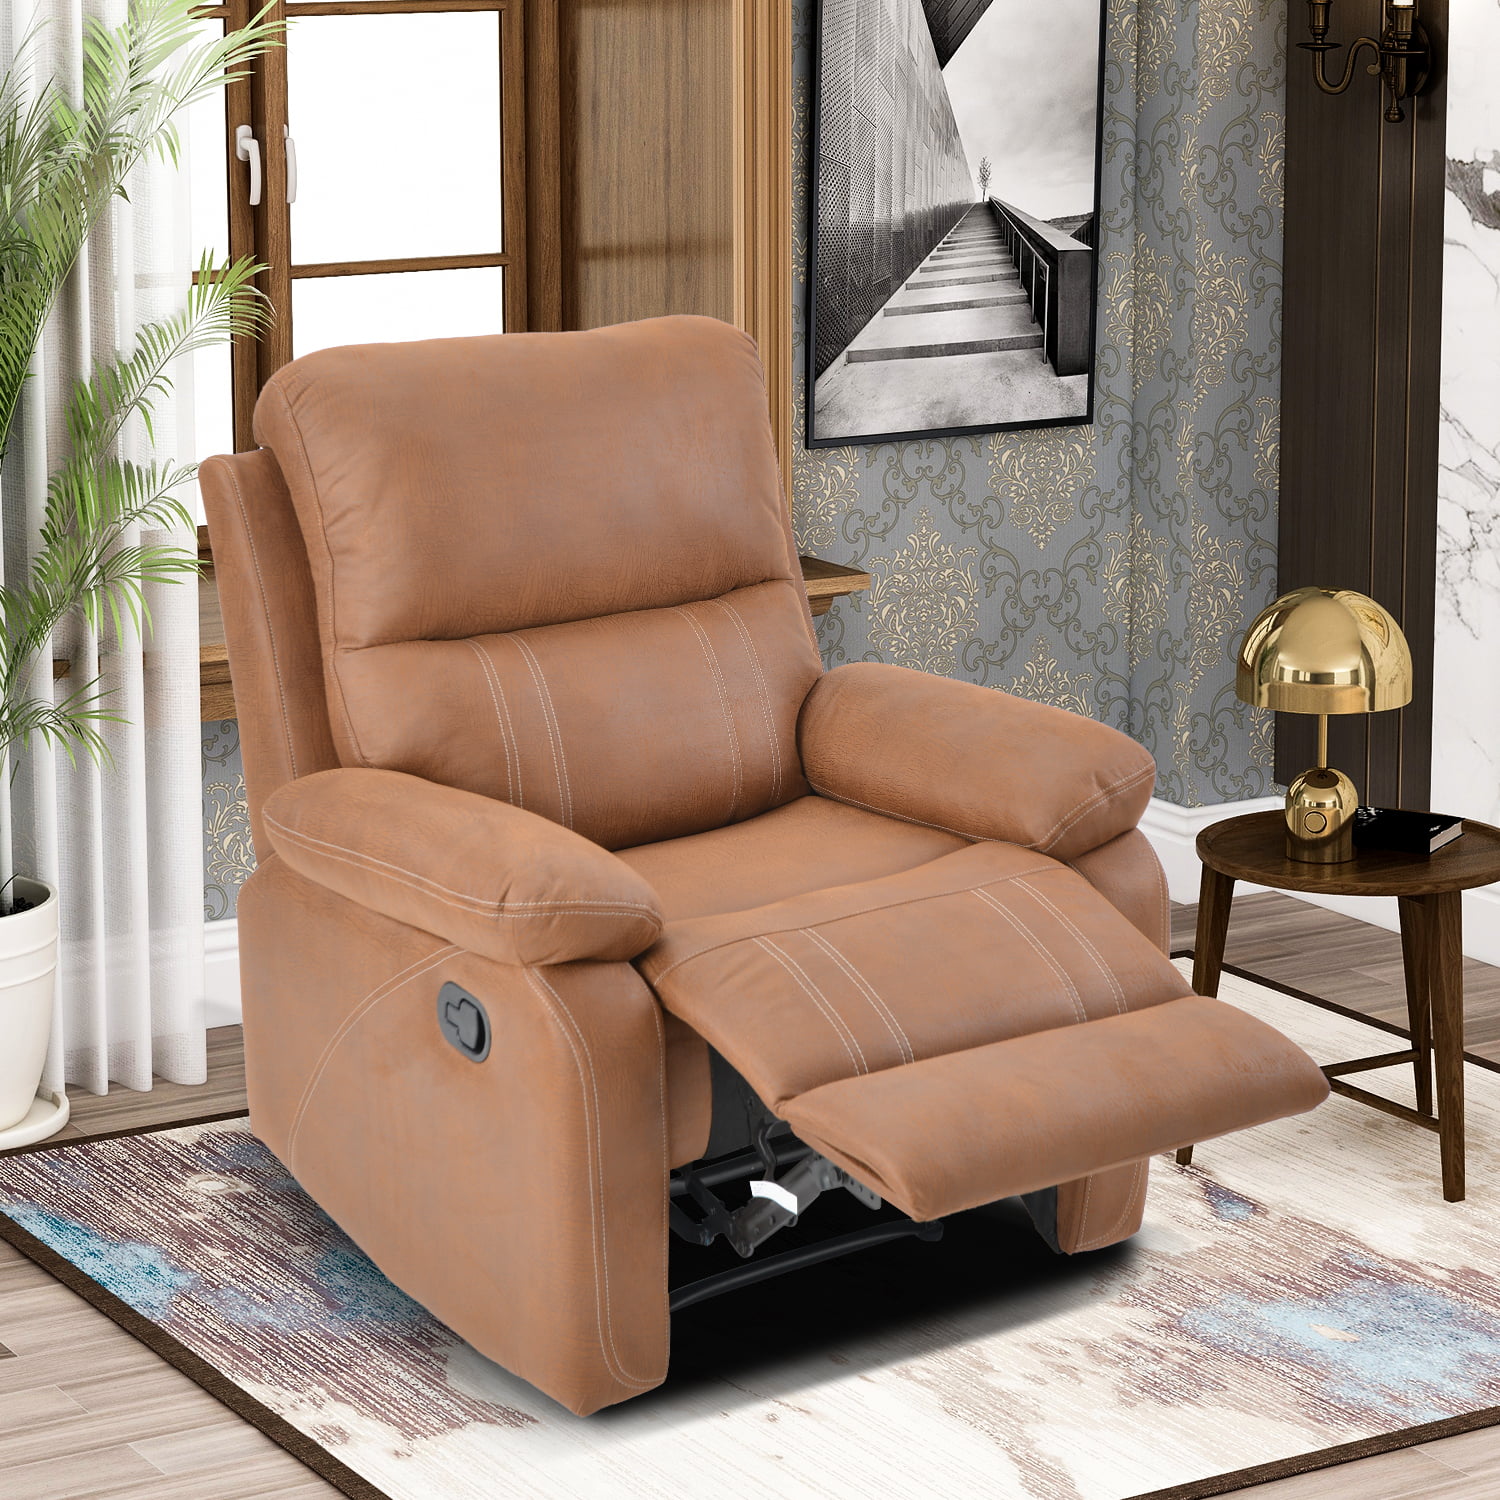 Recliner Arm chair,Theater Seating W/Adjustable Leg Rest and Reclining Functions,Single Padded Seat PU Leather Sofa Lounge Home Living Room-1